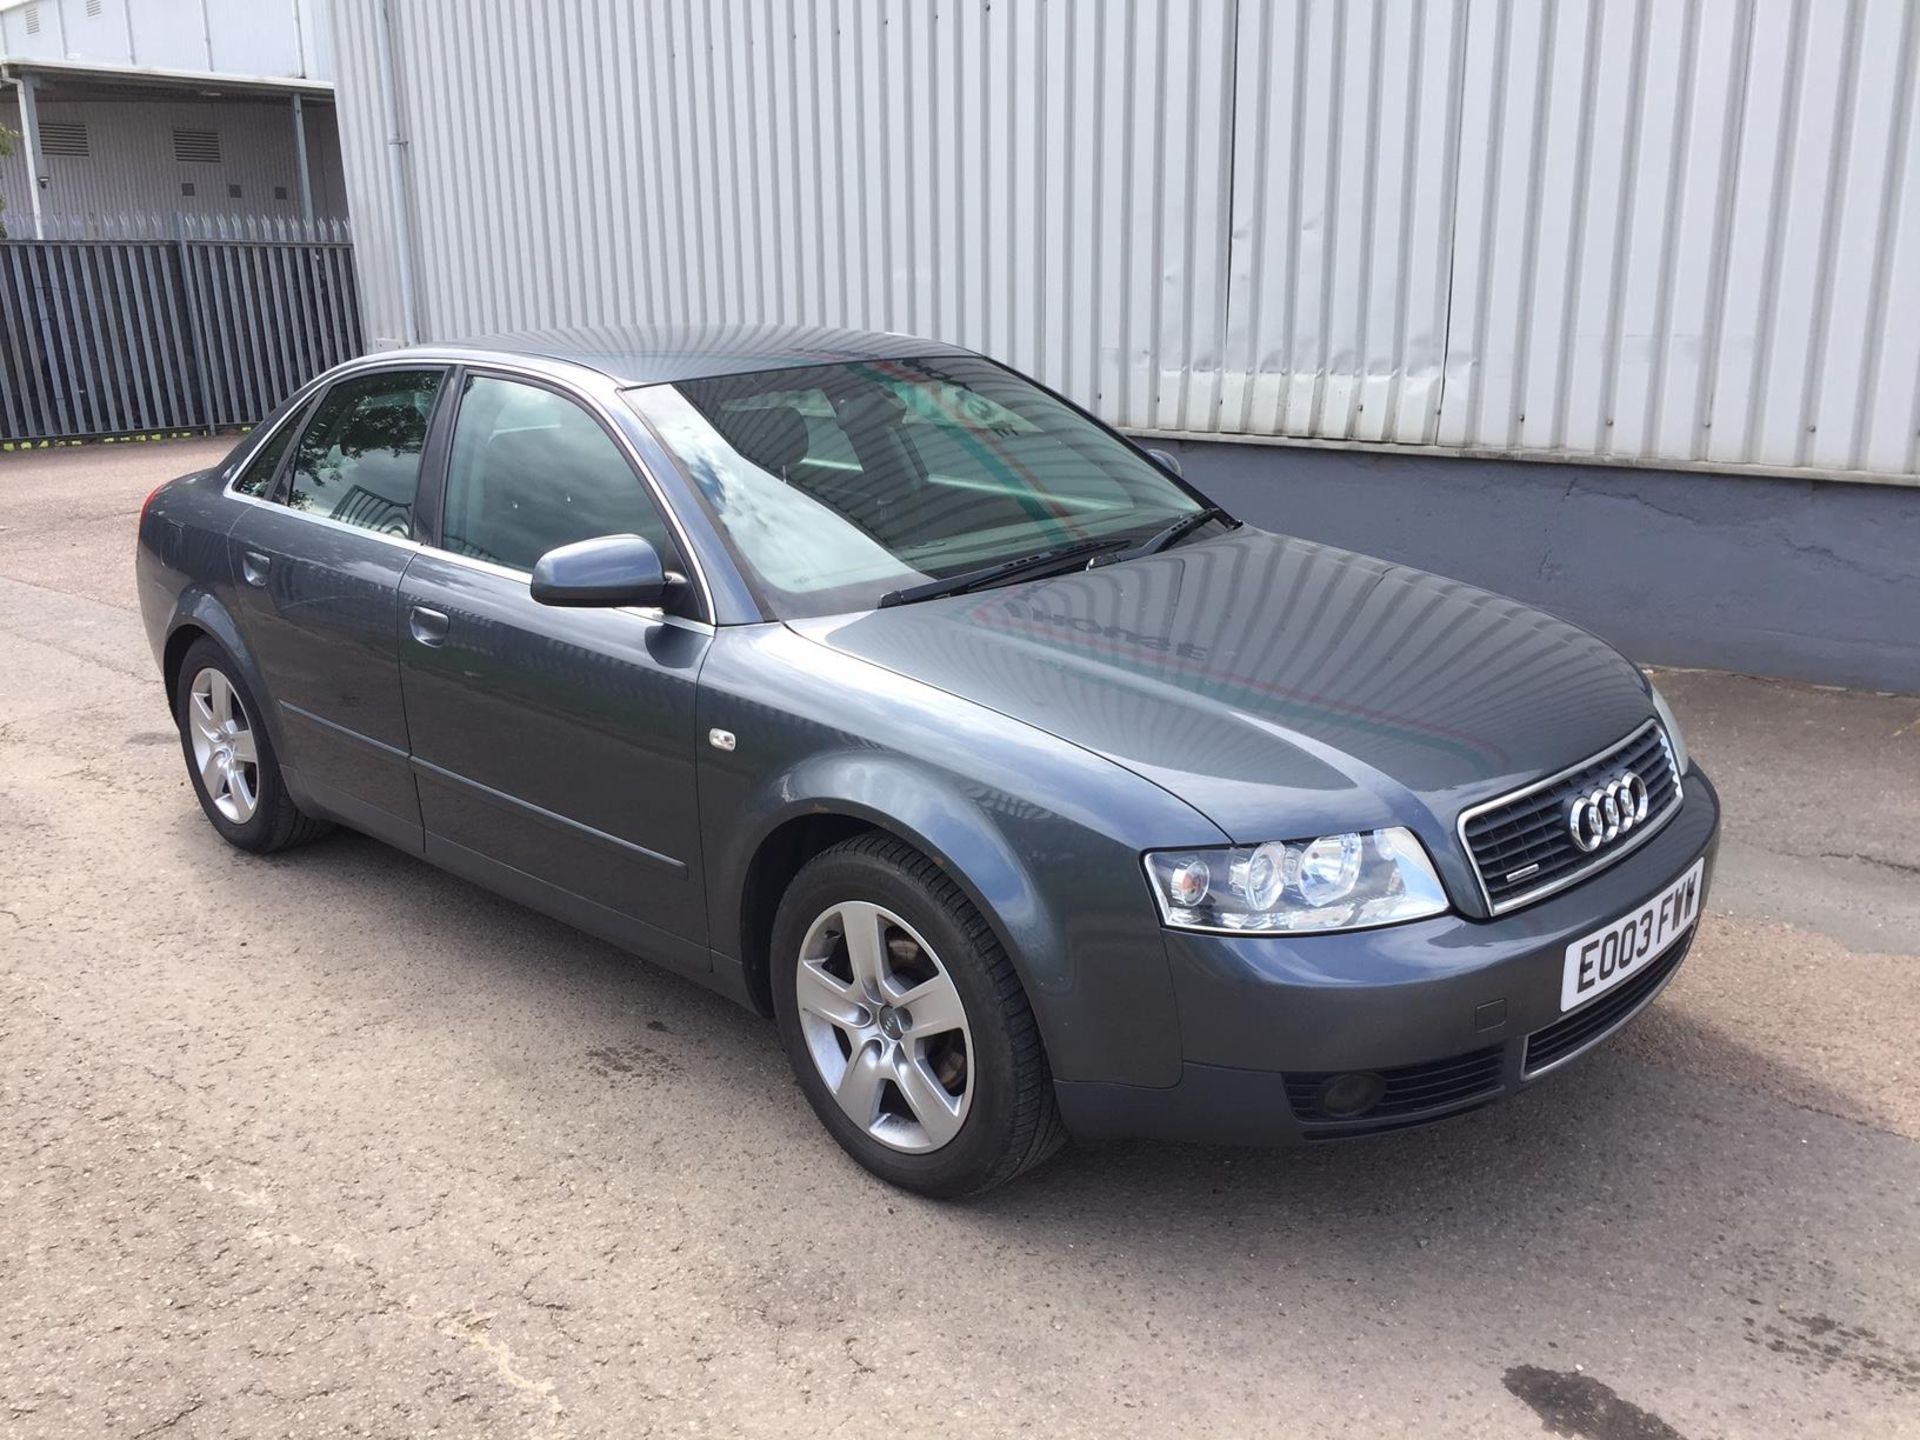 2003 Audi A4 Quattro 1.9 Tdi SE 4 Dr Saloon - CL505 - NO VAT ON THE HAMMER - Location: Corby, Northa